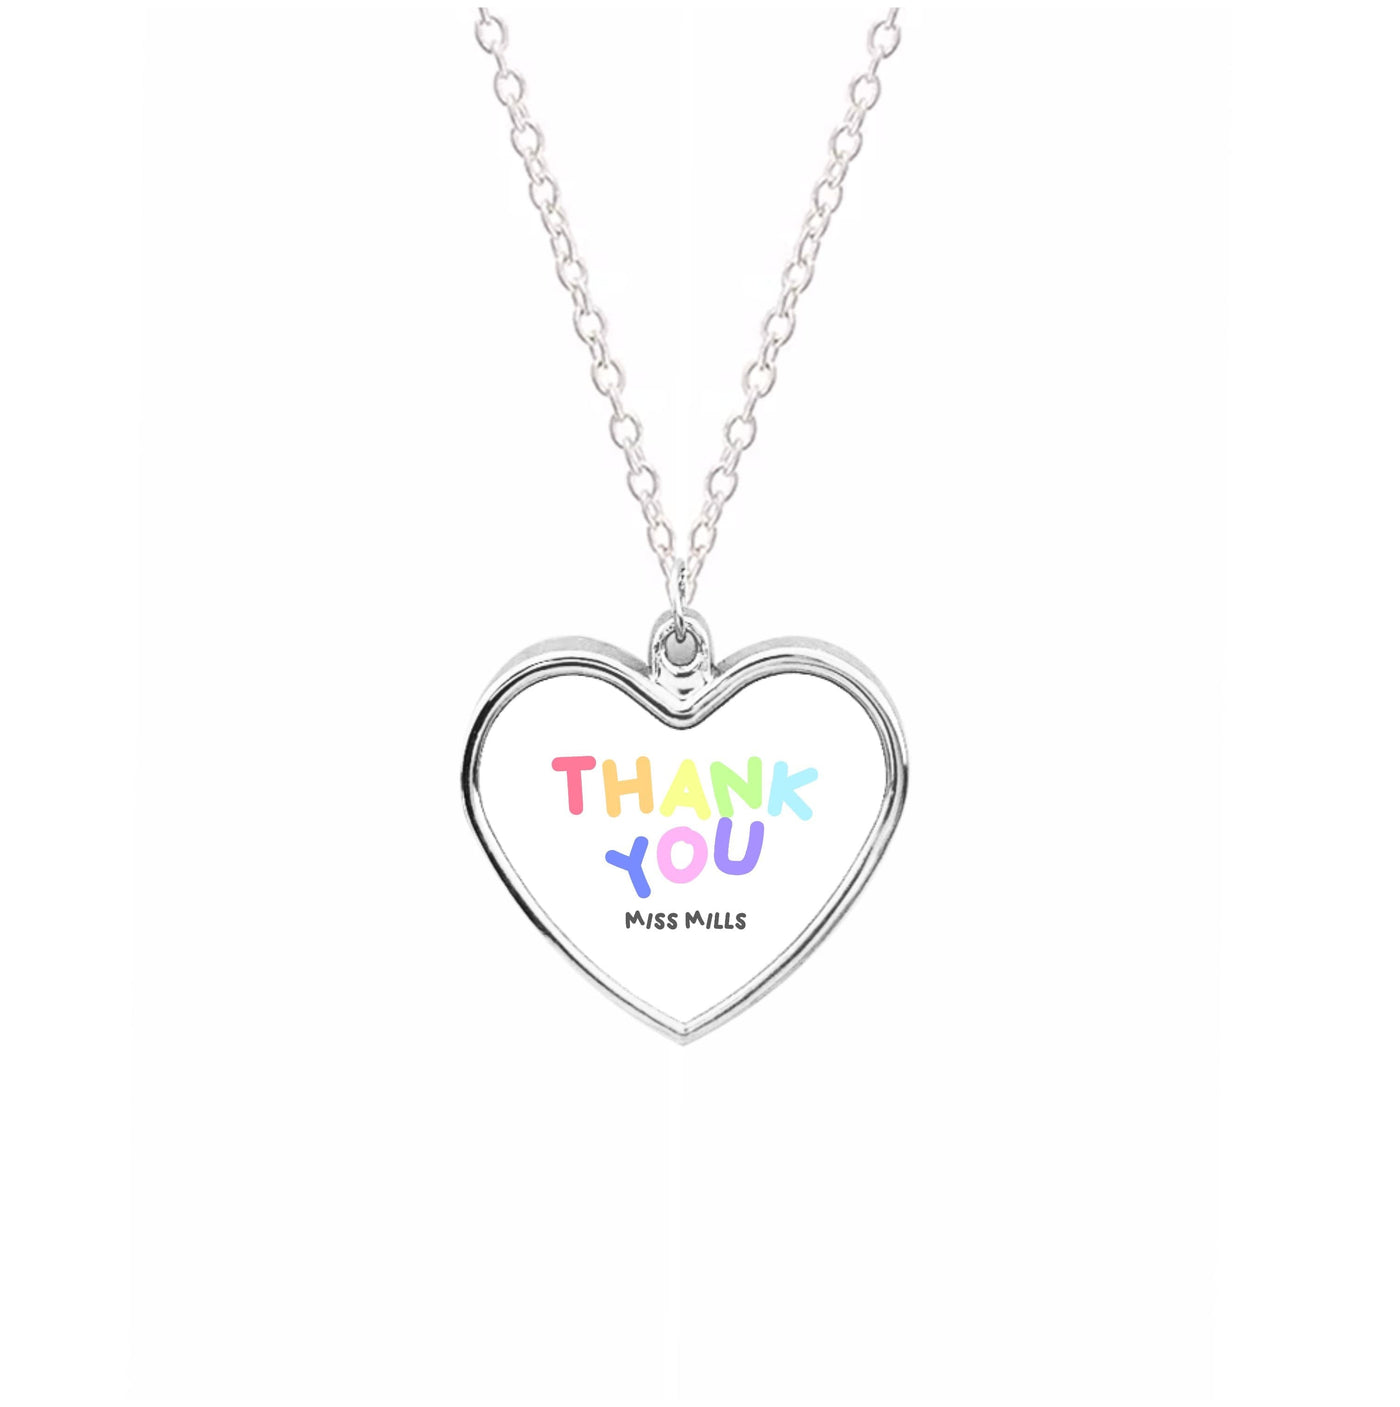 Thank You - Personalised Teachers Gift Necklace